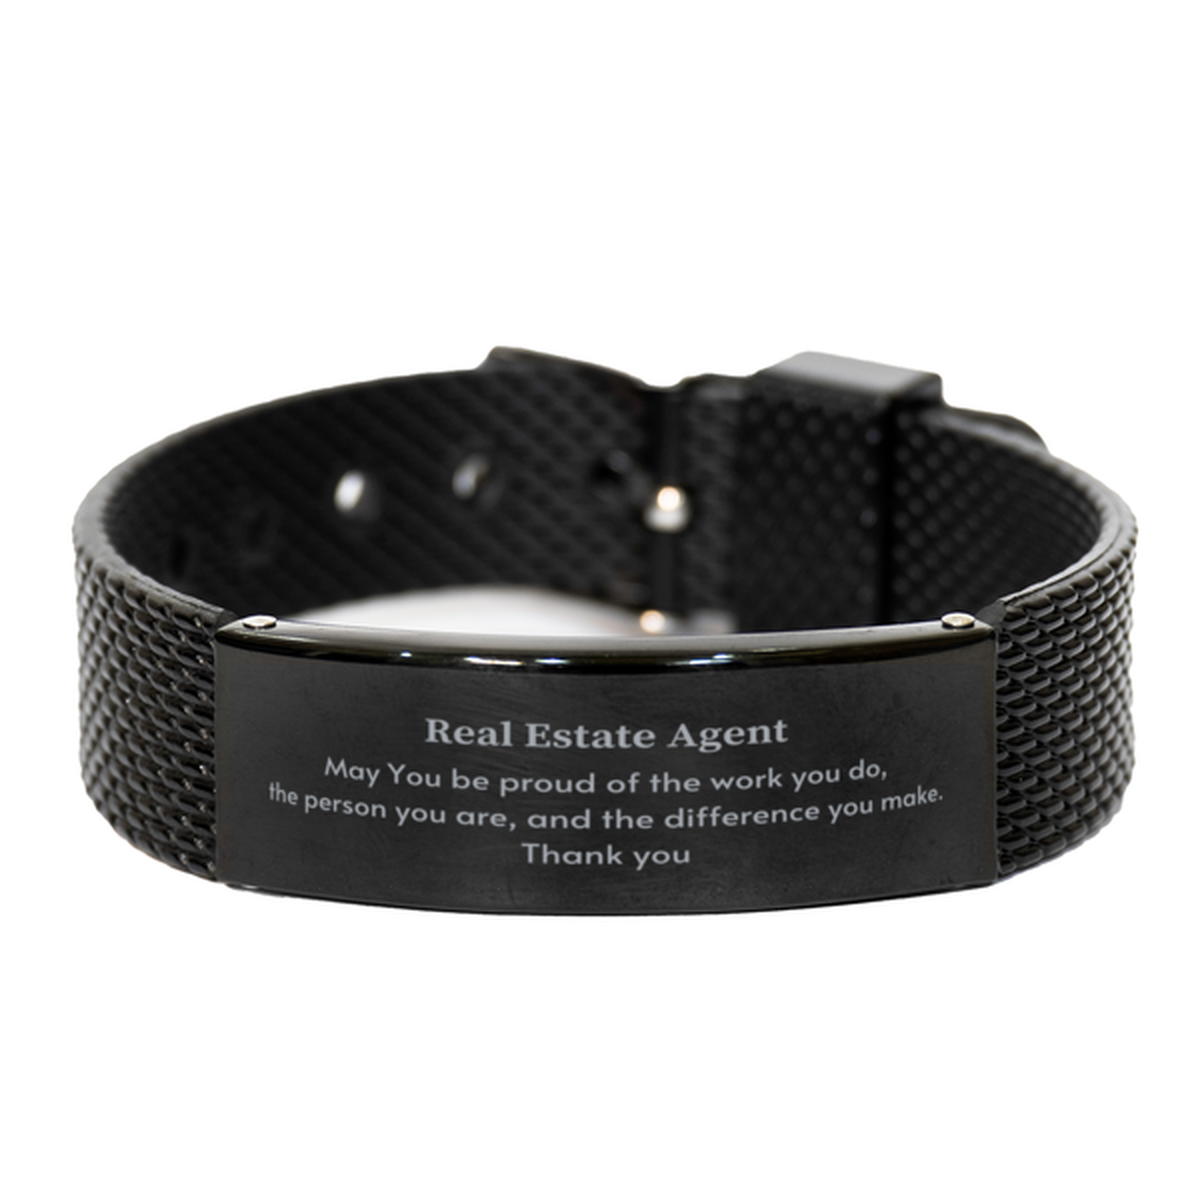 Heartwarming Black Shark Mesh Bracelet Retirement Coworkers Gifts for Real Estate Agent, Real Estate Agent May You be proud of the work you do, the person you are Gifts for Boss Men Women Friends